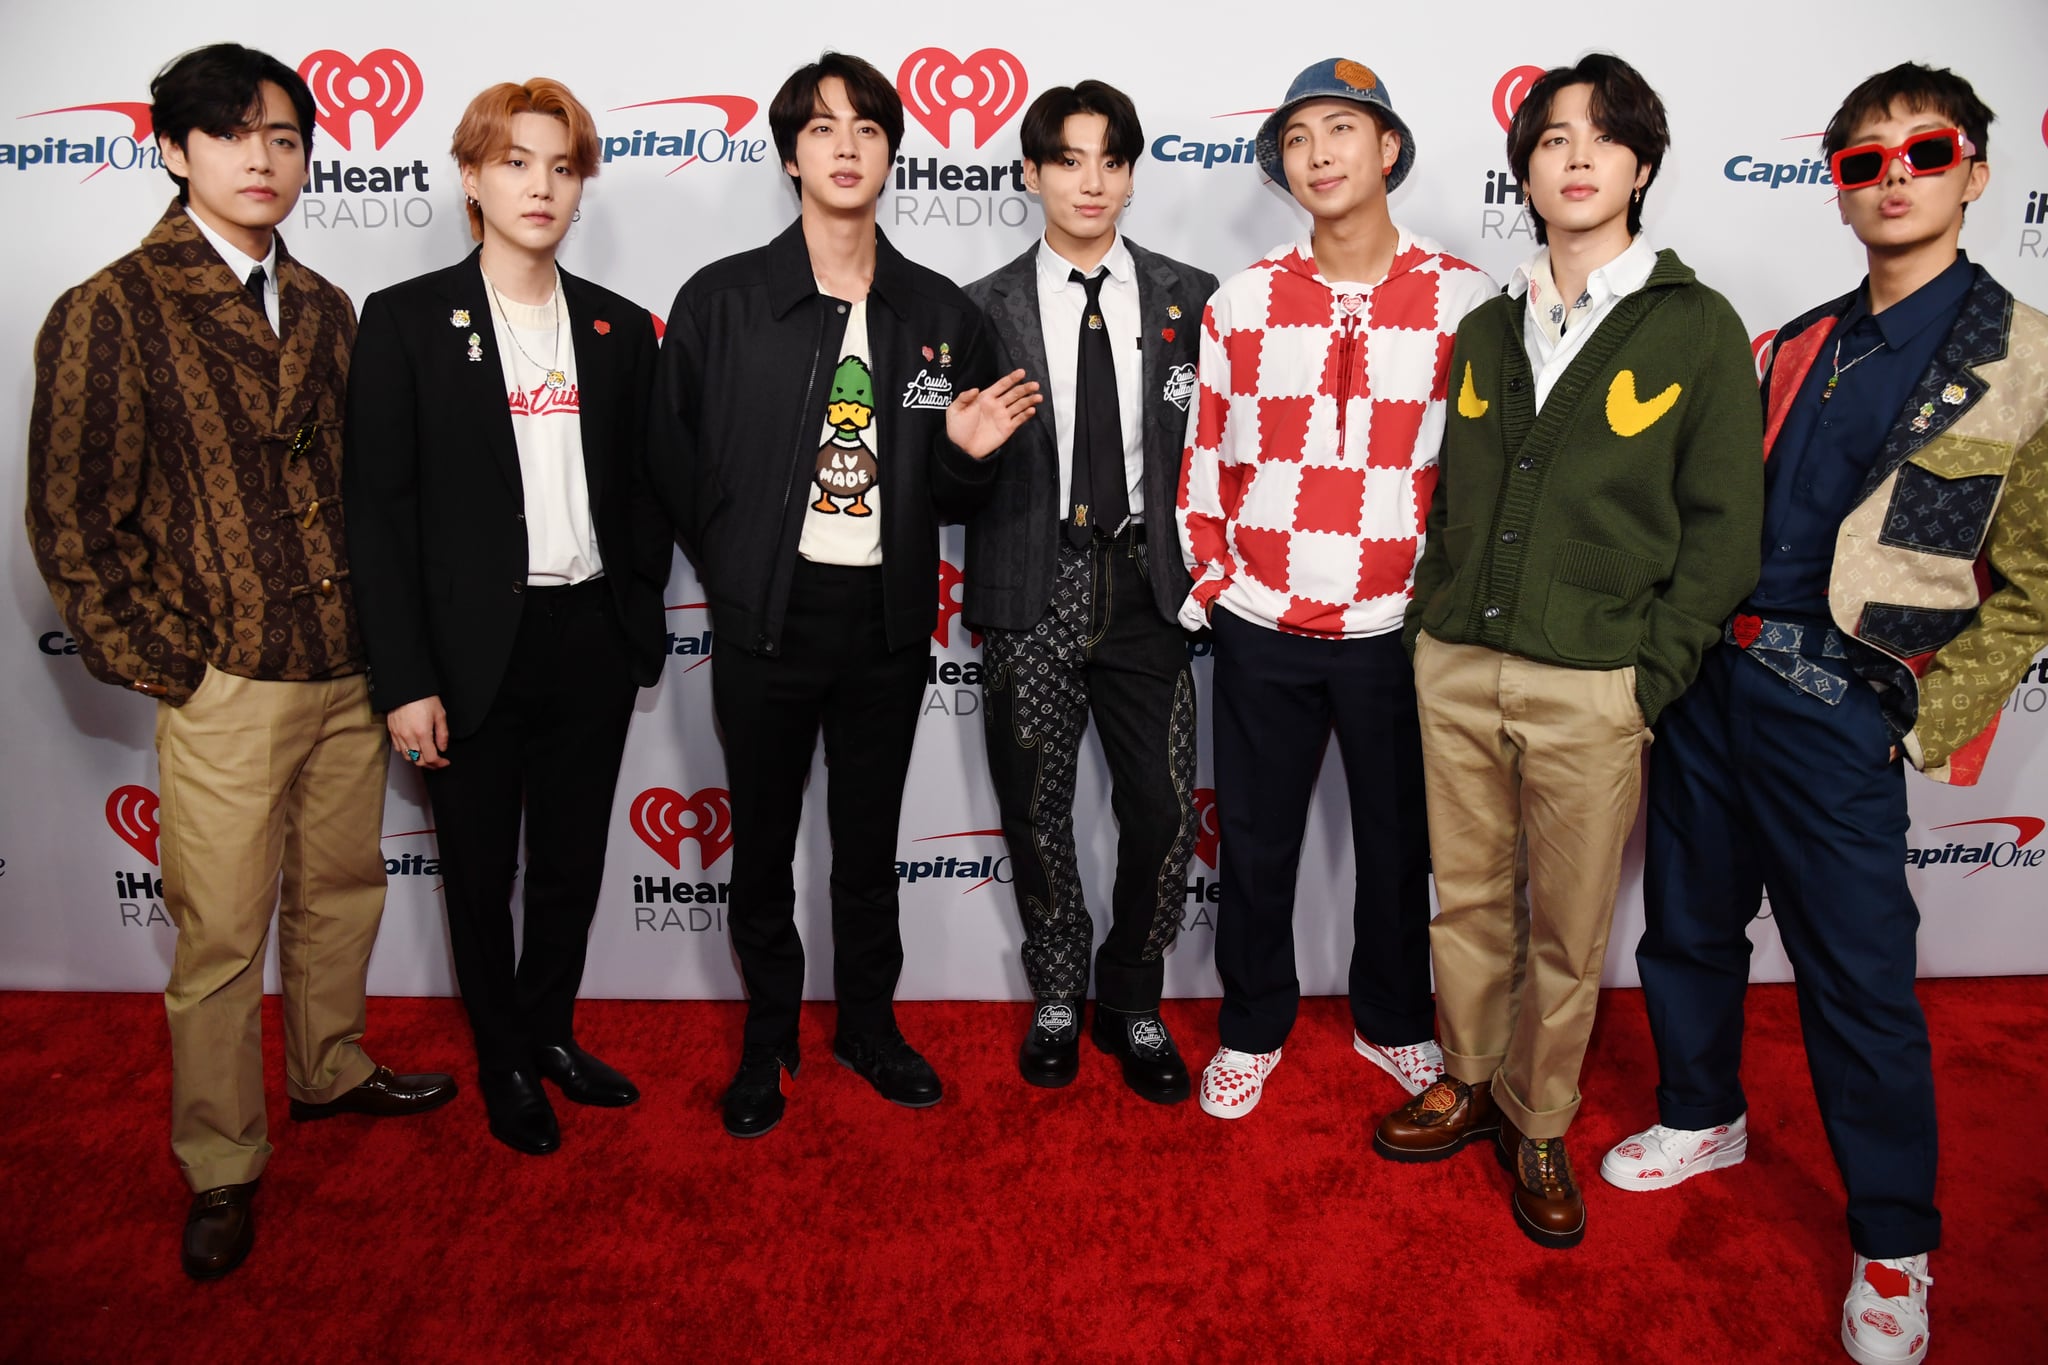 INGLEWOOD, CA - DECEMBER 03: (editorial use only) (LR) V, Suga, Jin, Jungkook, RM, Jimin, and J-Hope of BTS iHeartRadio 102.7 KIIS FM's Jingle Ball Presented by Capital One at Forum on December 2021 were done.  03, 2021 in Los Angeles, California.  (Photo by Kevin Mazur/Getty Images for iHeartRadio)